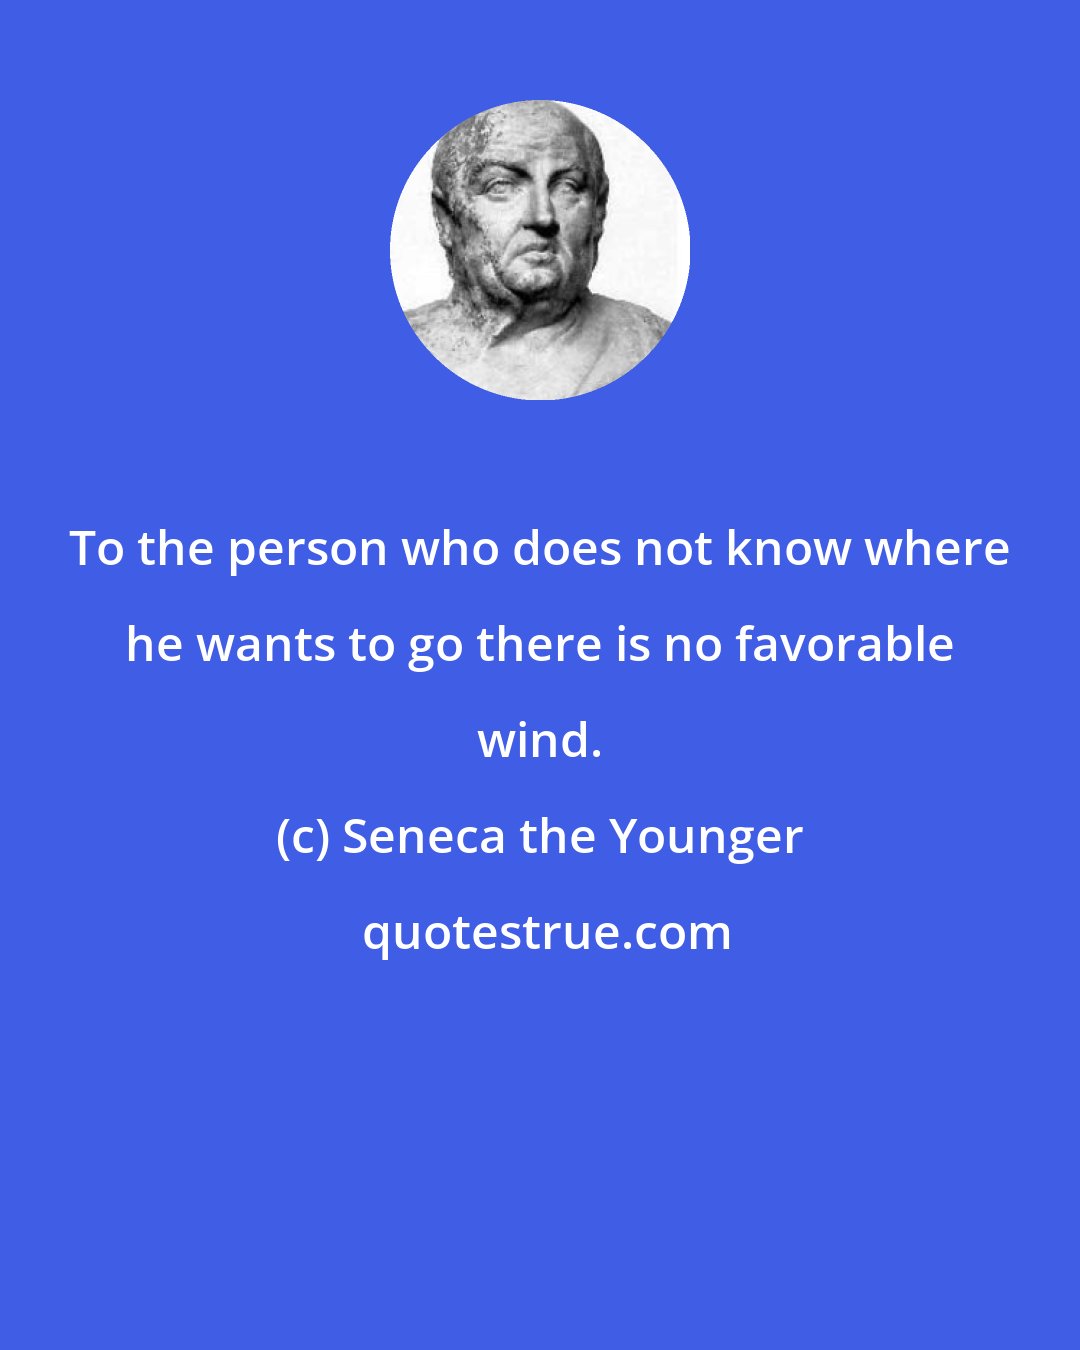 Seneca the Younger: To the person who does not know where he wants to go there is no favorable wind.